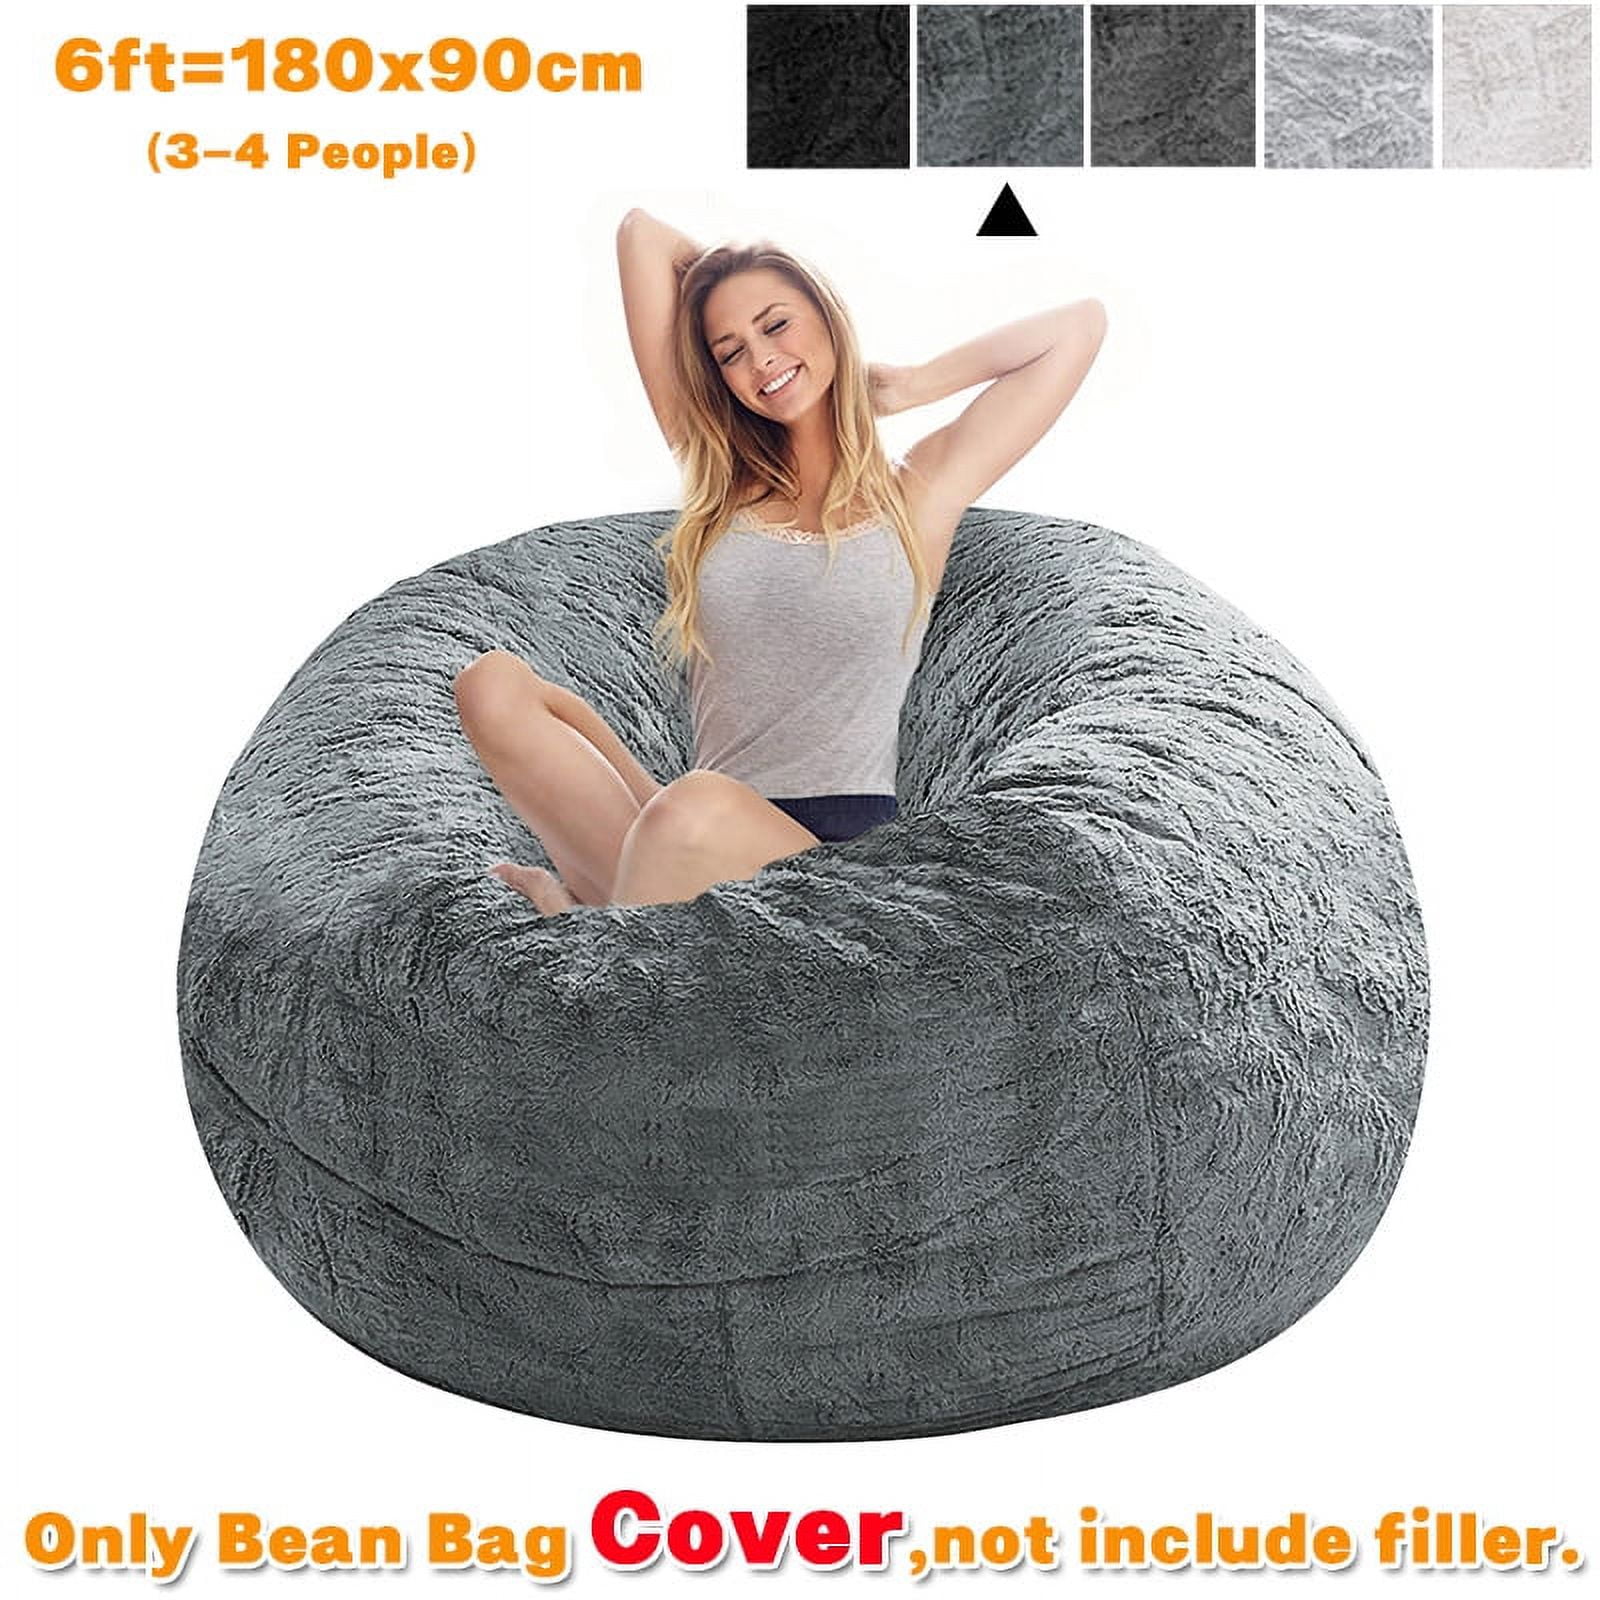 Multifunctional Bean Bag Chair, Large Adult Childrens Living Room Furniture, Soft and Comfortable Bean Bag Cover, Can Relax and Sleep Easy to Clean (